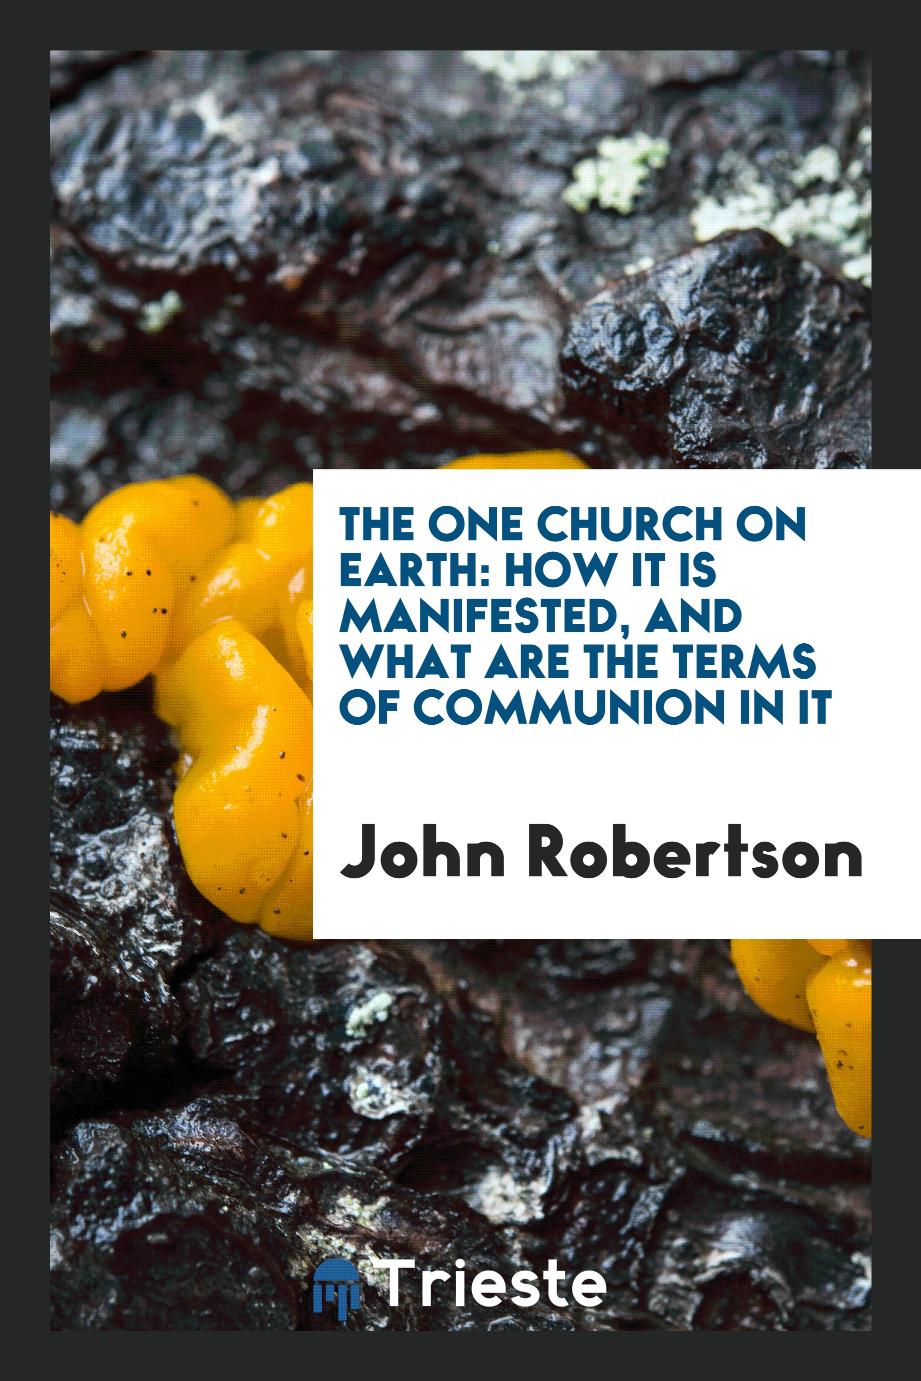 The One Church on Earth: How It Is Manifested, and What Are the Terms of Communion in It